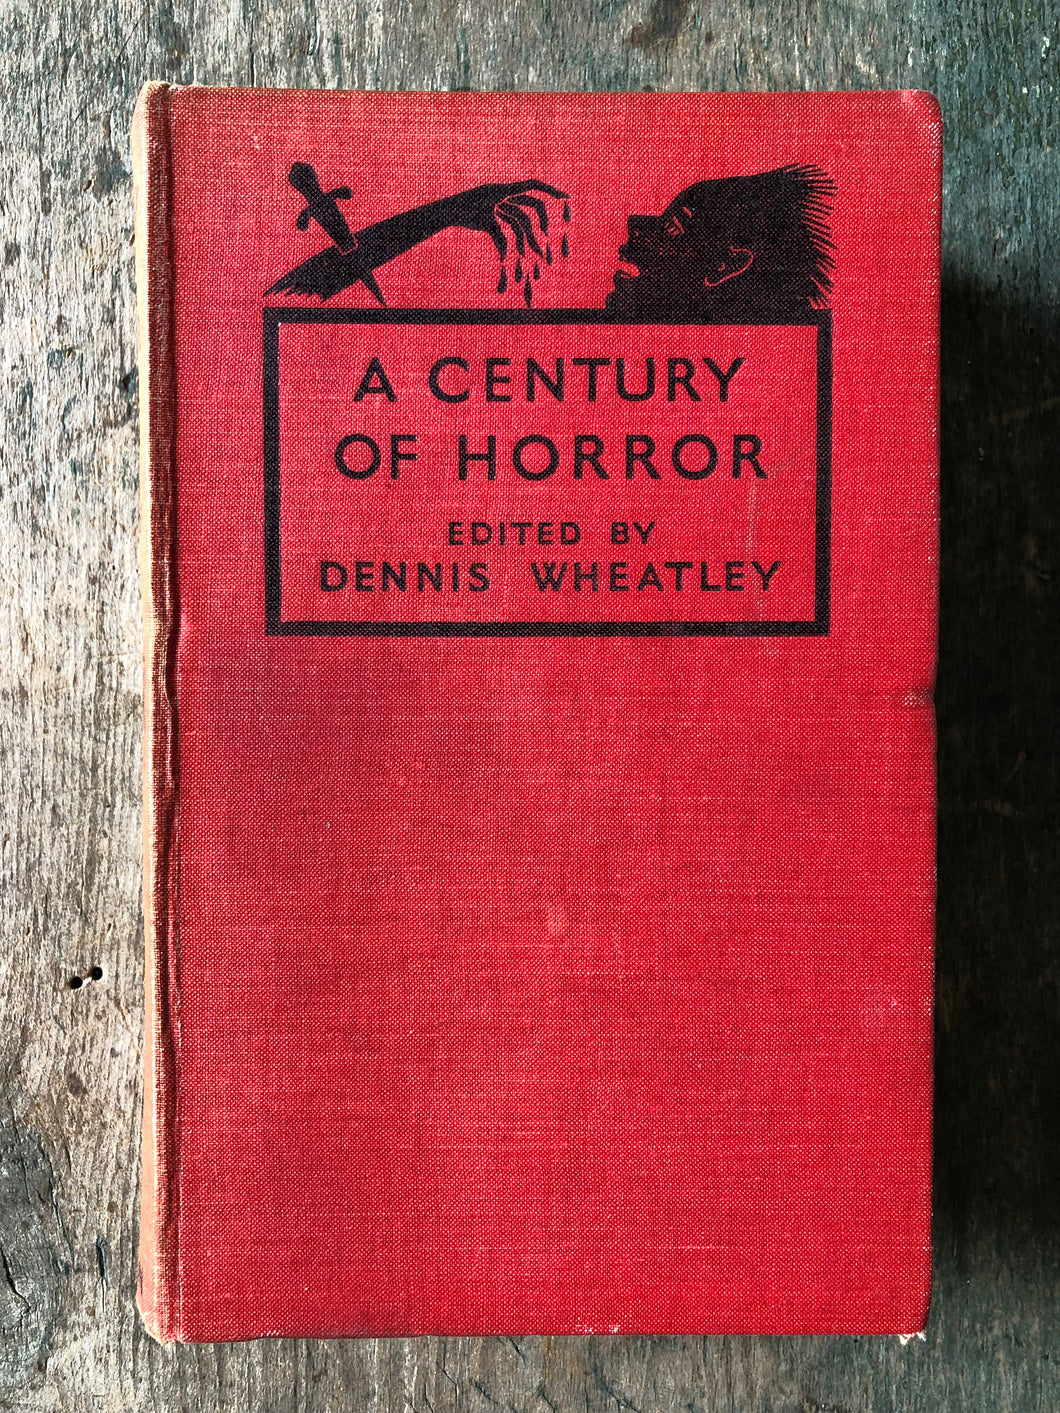 A Century of Horror Stories edited by Dennis Wheatley